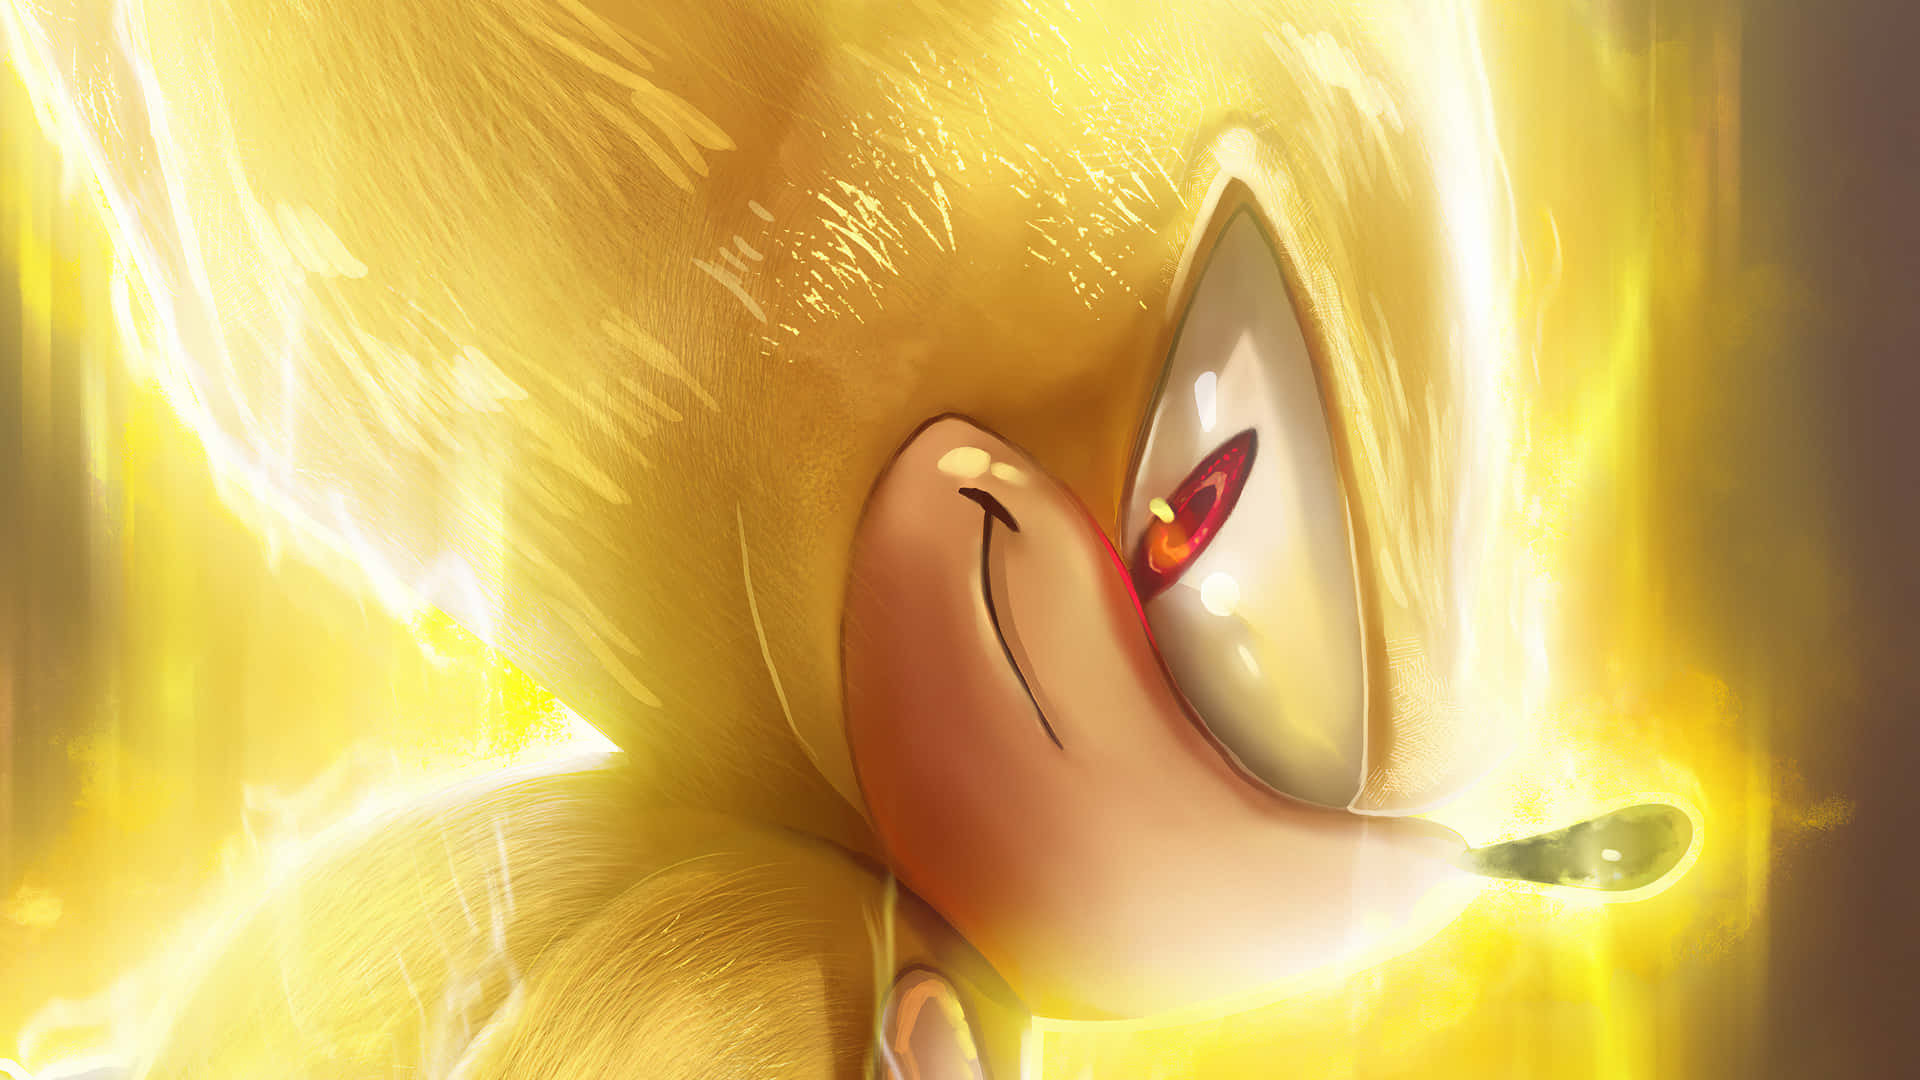 Sonicthe Hedgehog Av Sonic The Hedgehog (in The Context Of Computer Or Mobile Wallpaper) Would Be 